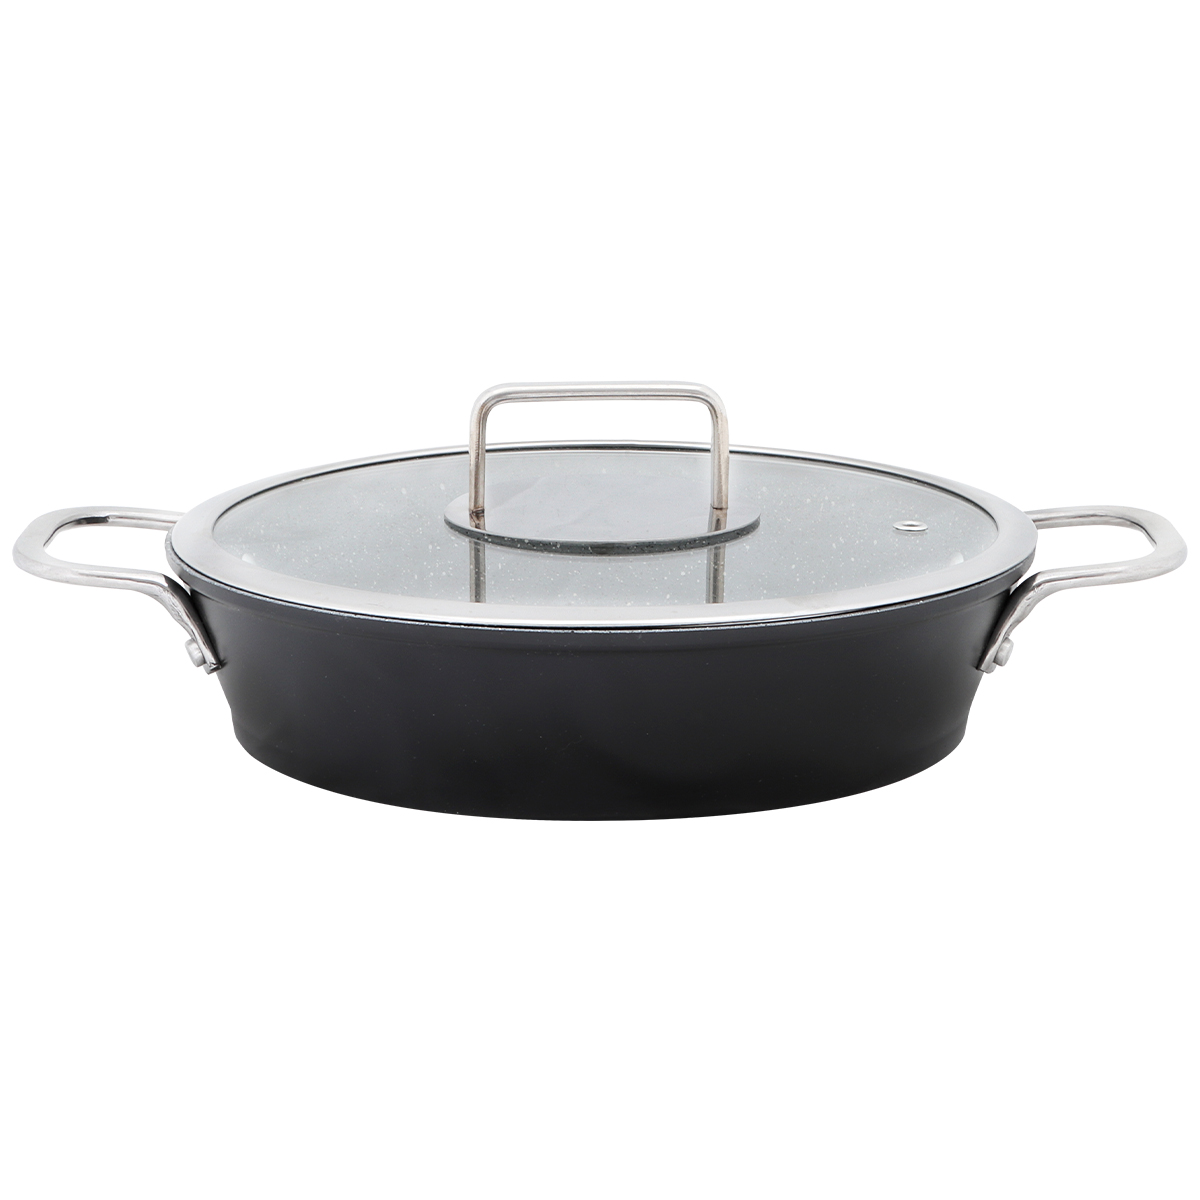 Serenk excellence granite egg pan with glass lid 22 cm